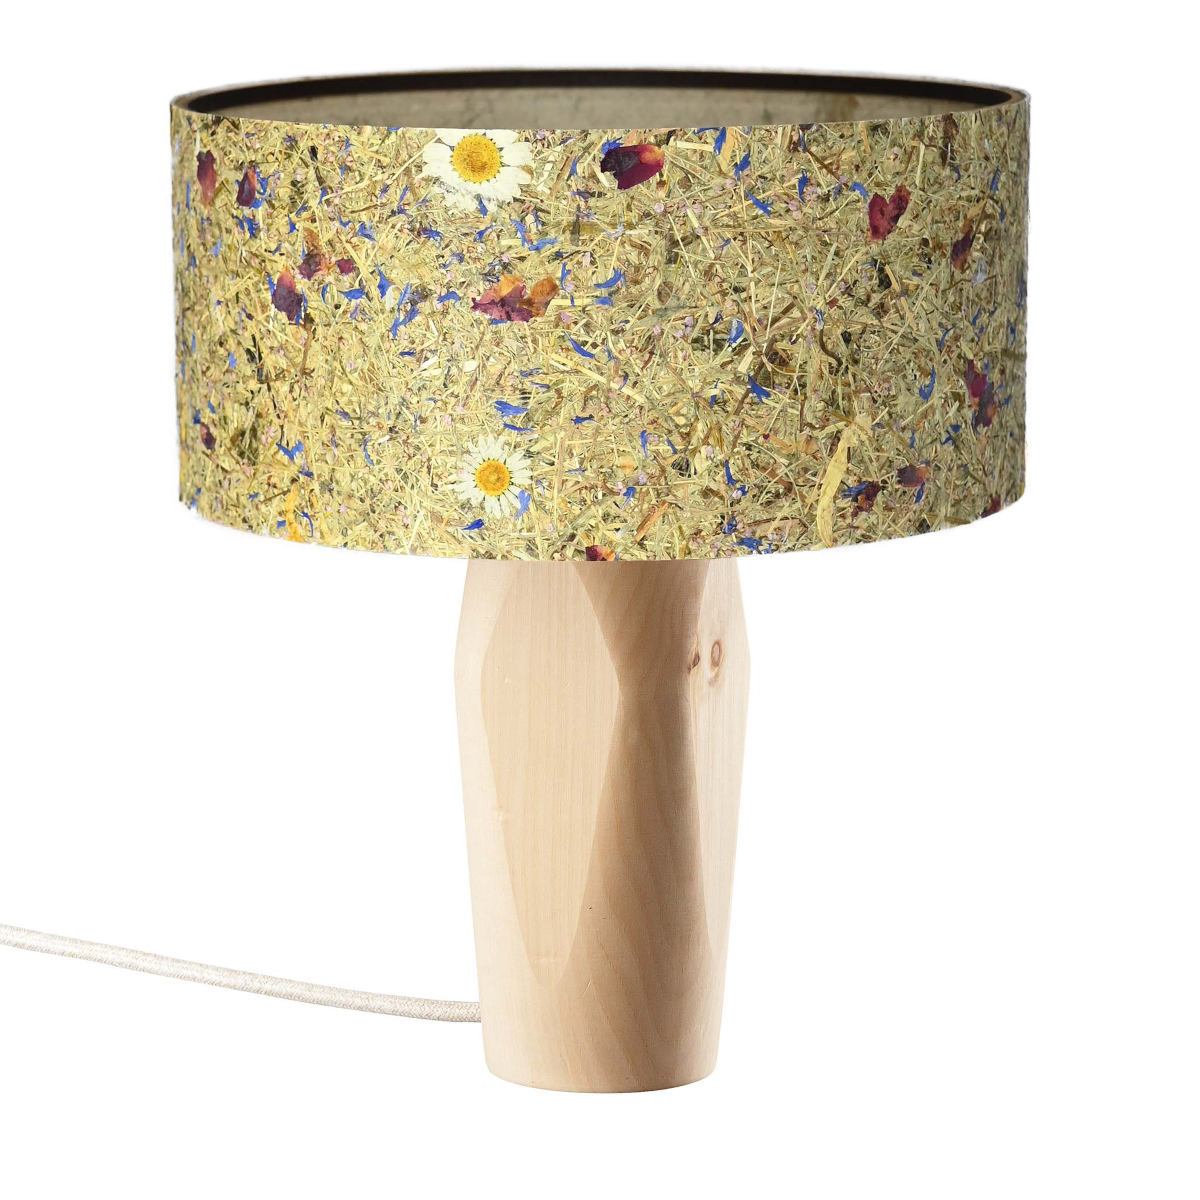 Table light: Cembra Base, Meadow Flowers Shade